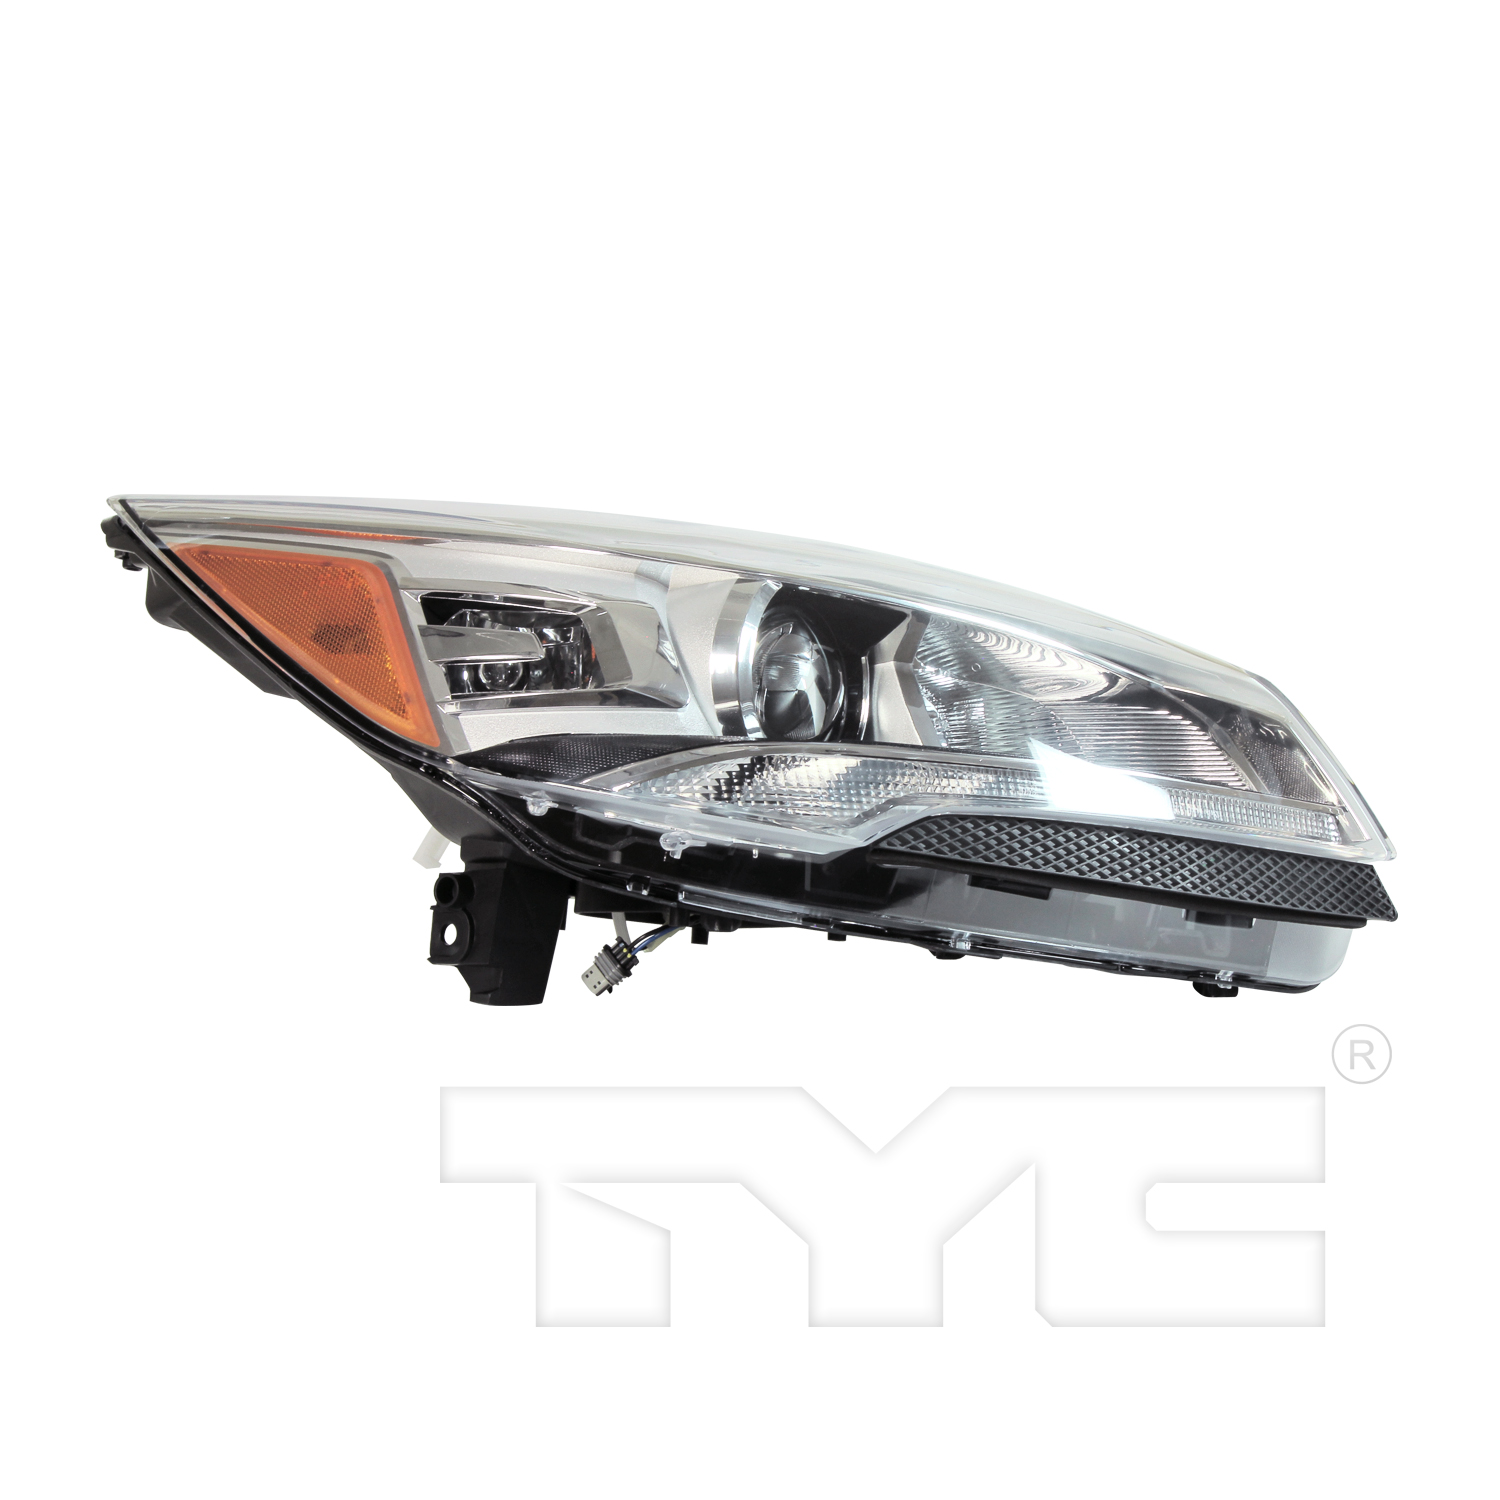 Aftermarket HEADLIGHTS for FORD - ESCAPE, ESCAPE,13-16,RT Headlamp assy composite